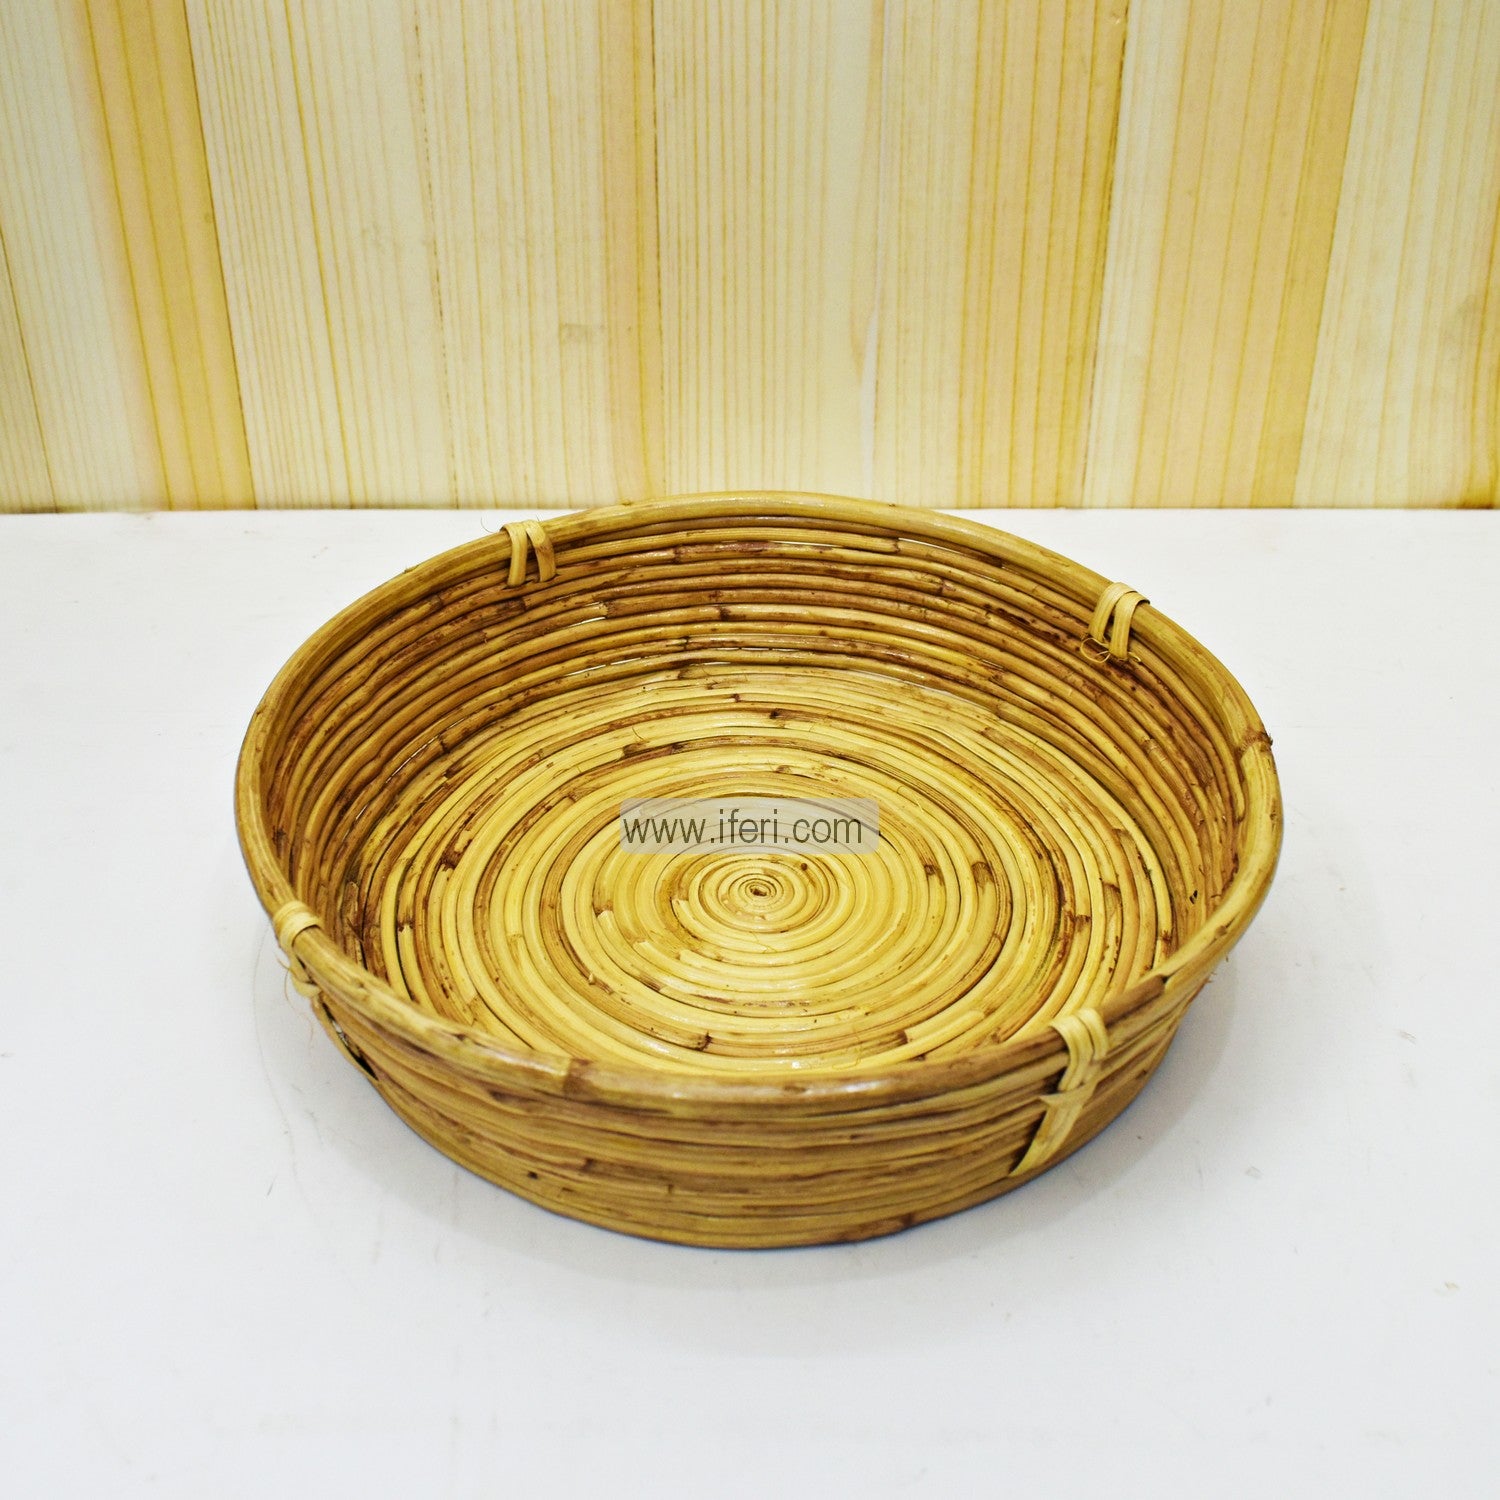 12 inch Round Bread and Roti Basket for Kitchen and Dining Serving ALF0978